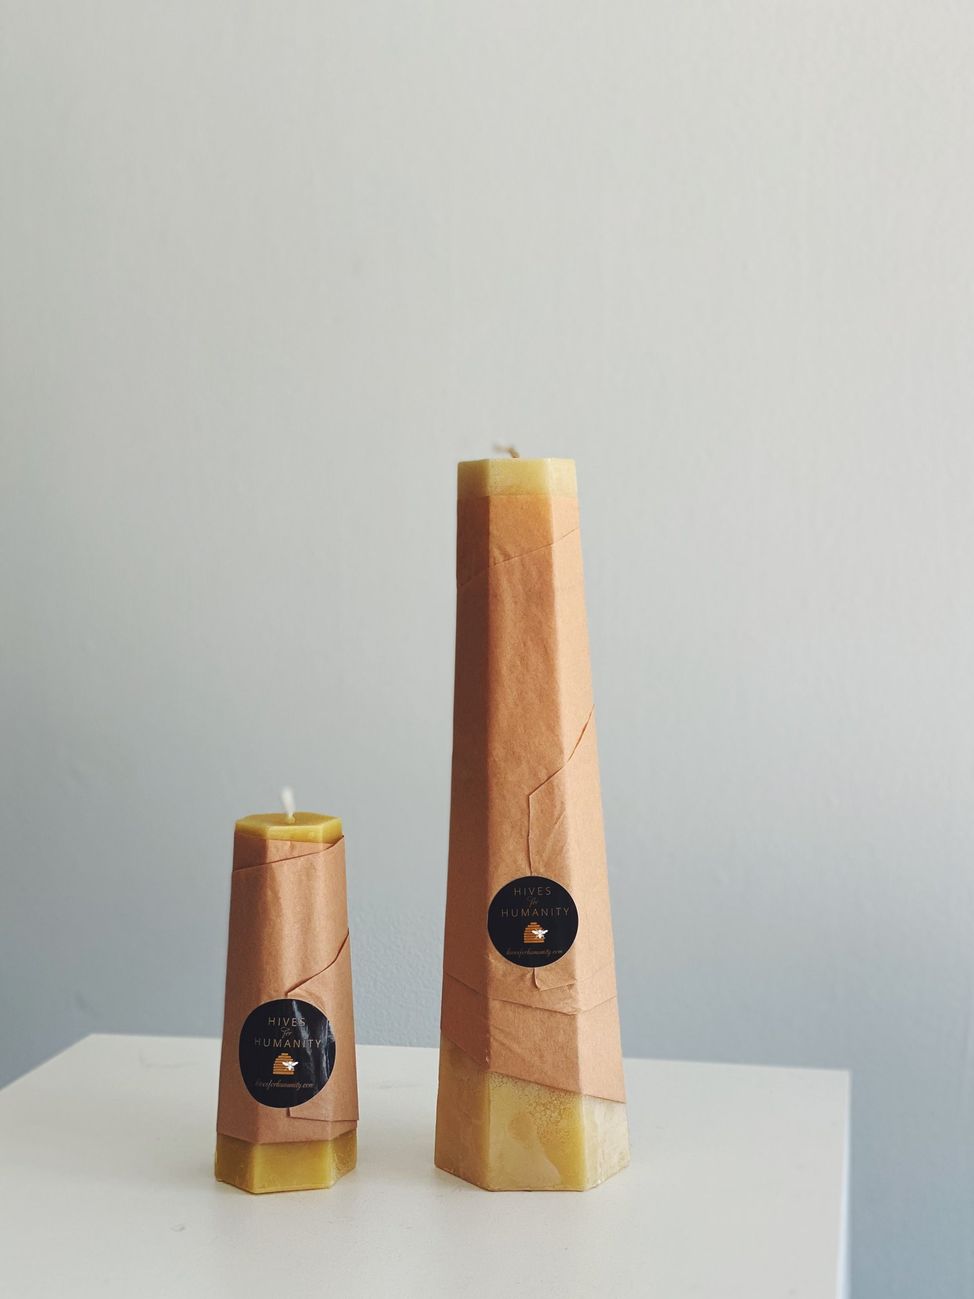 Hives For Humanity — Beeswax Hexagonal Candle